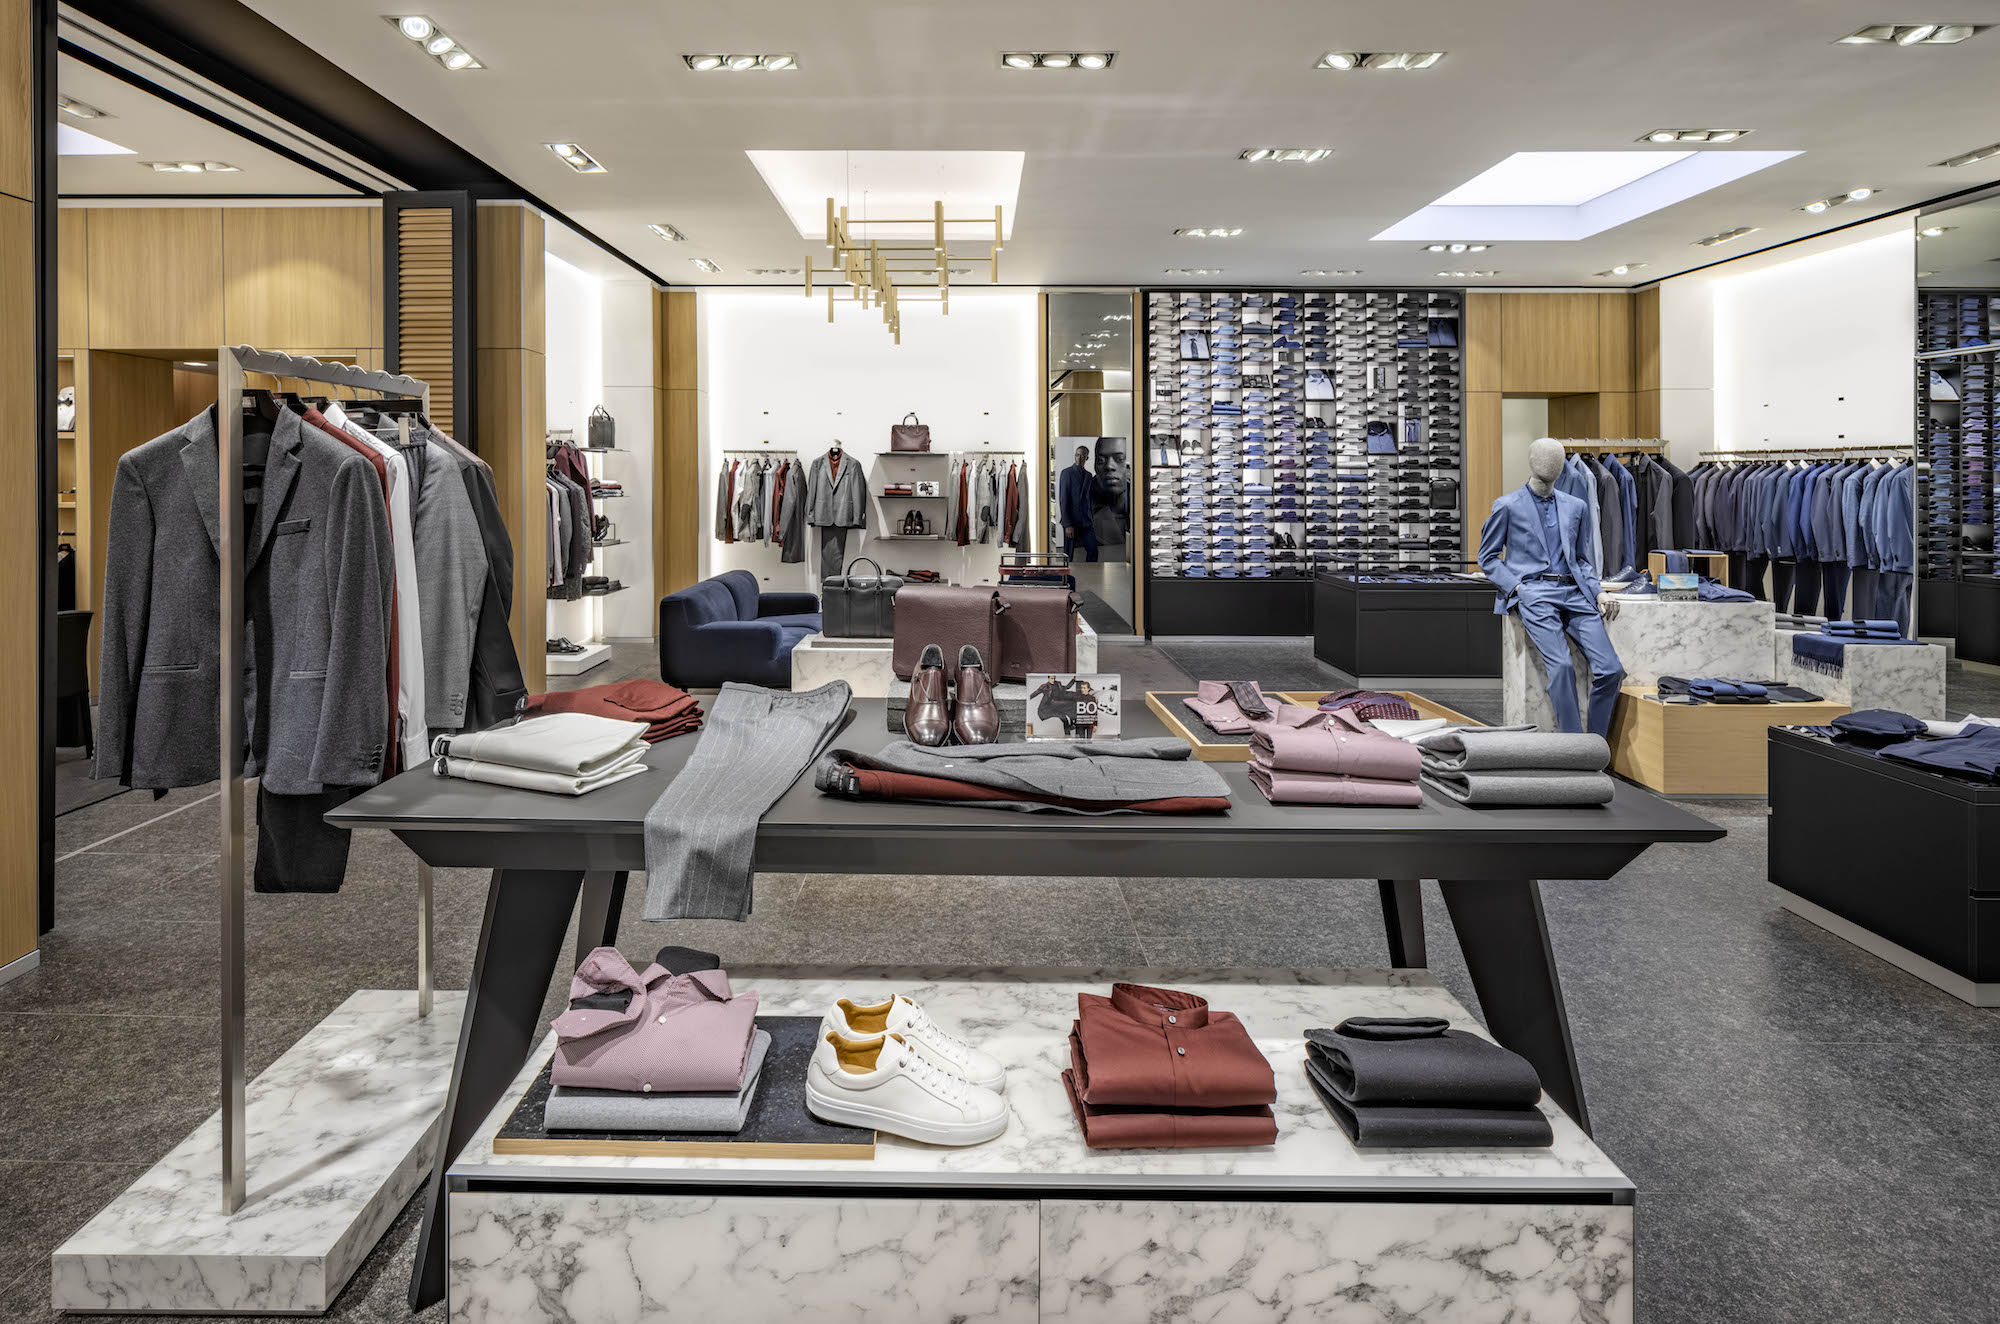 HUGO BOSS Just Opened A Beautiful New Canadian Flagship Store In Toronto